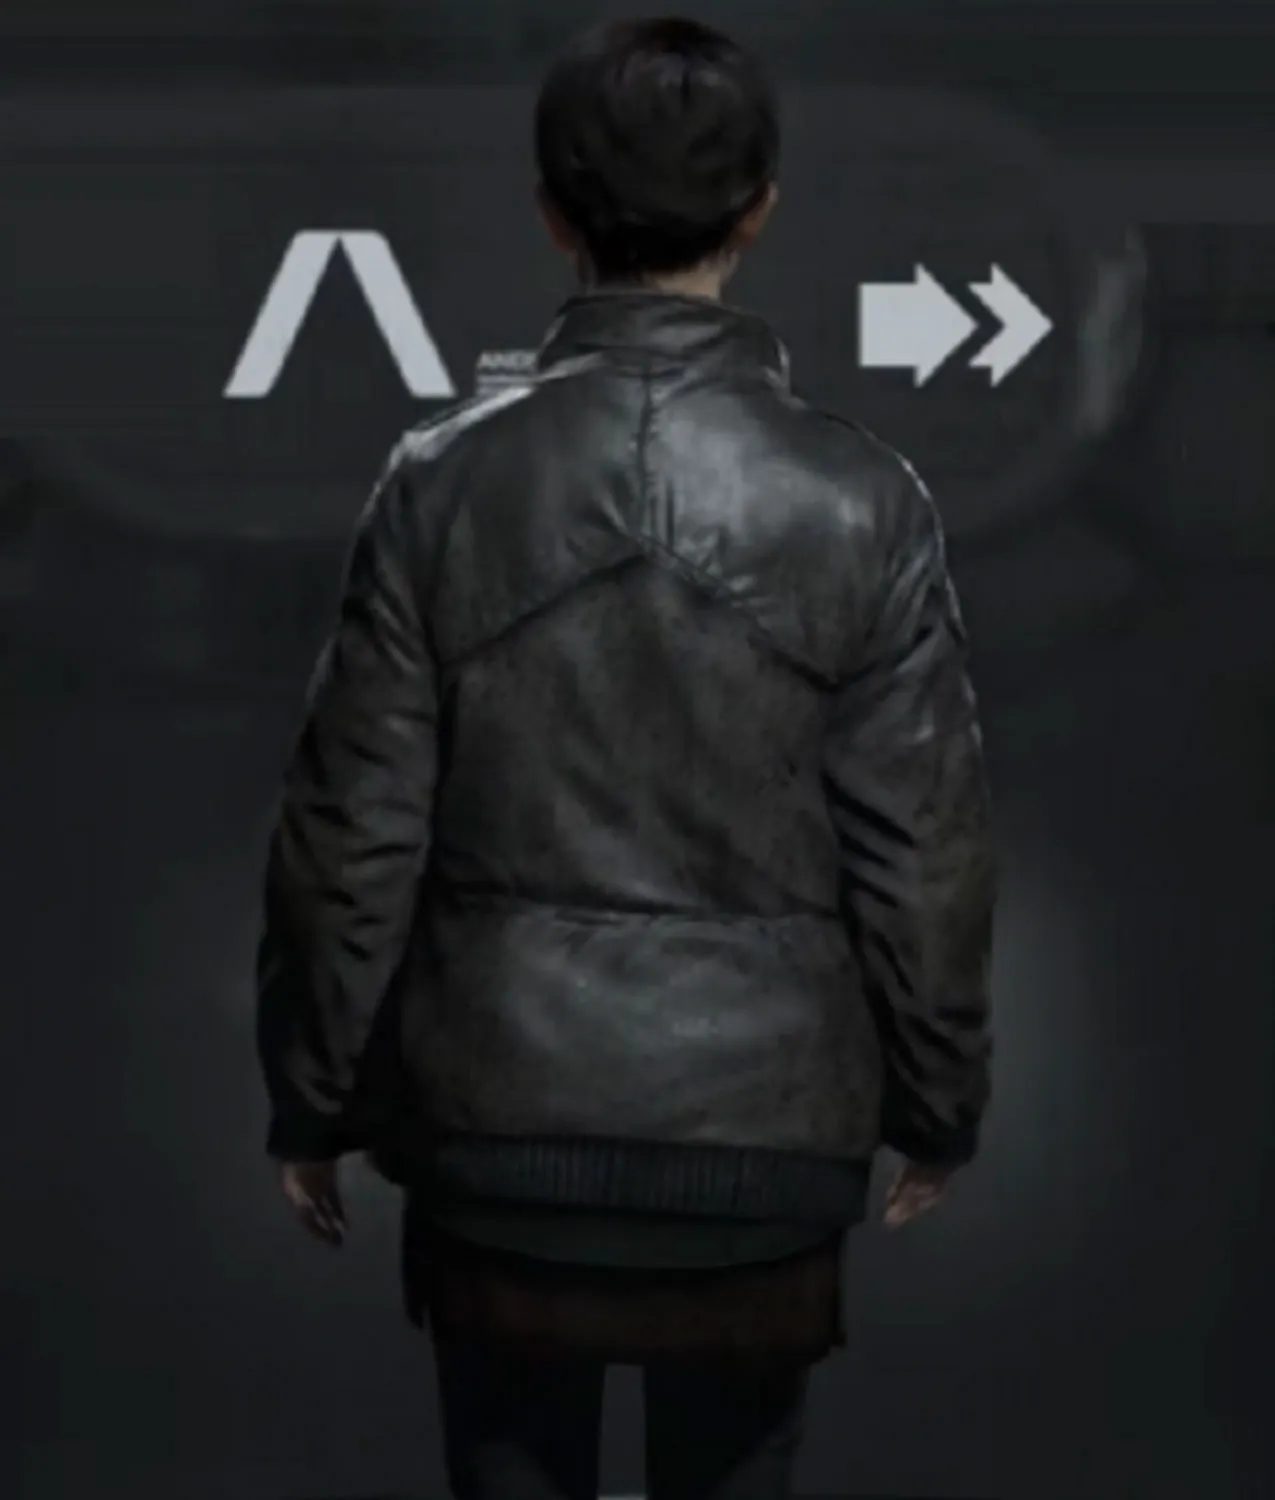 Connor Detroit Become Human Leather Jacket - Just American Jackets